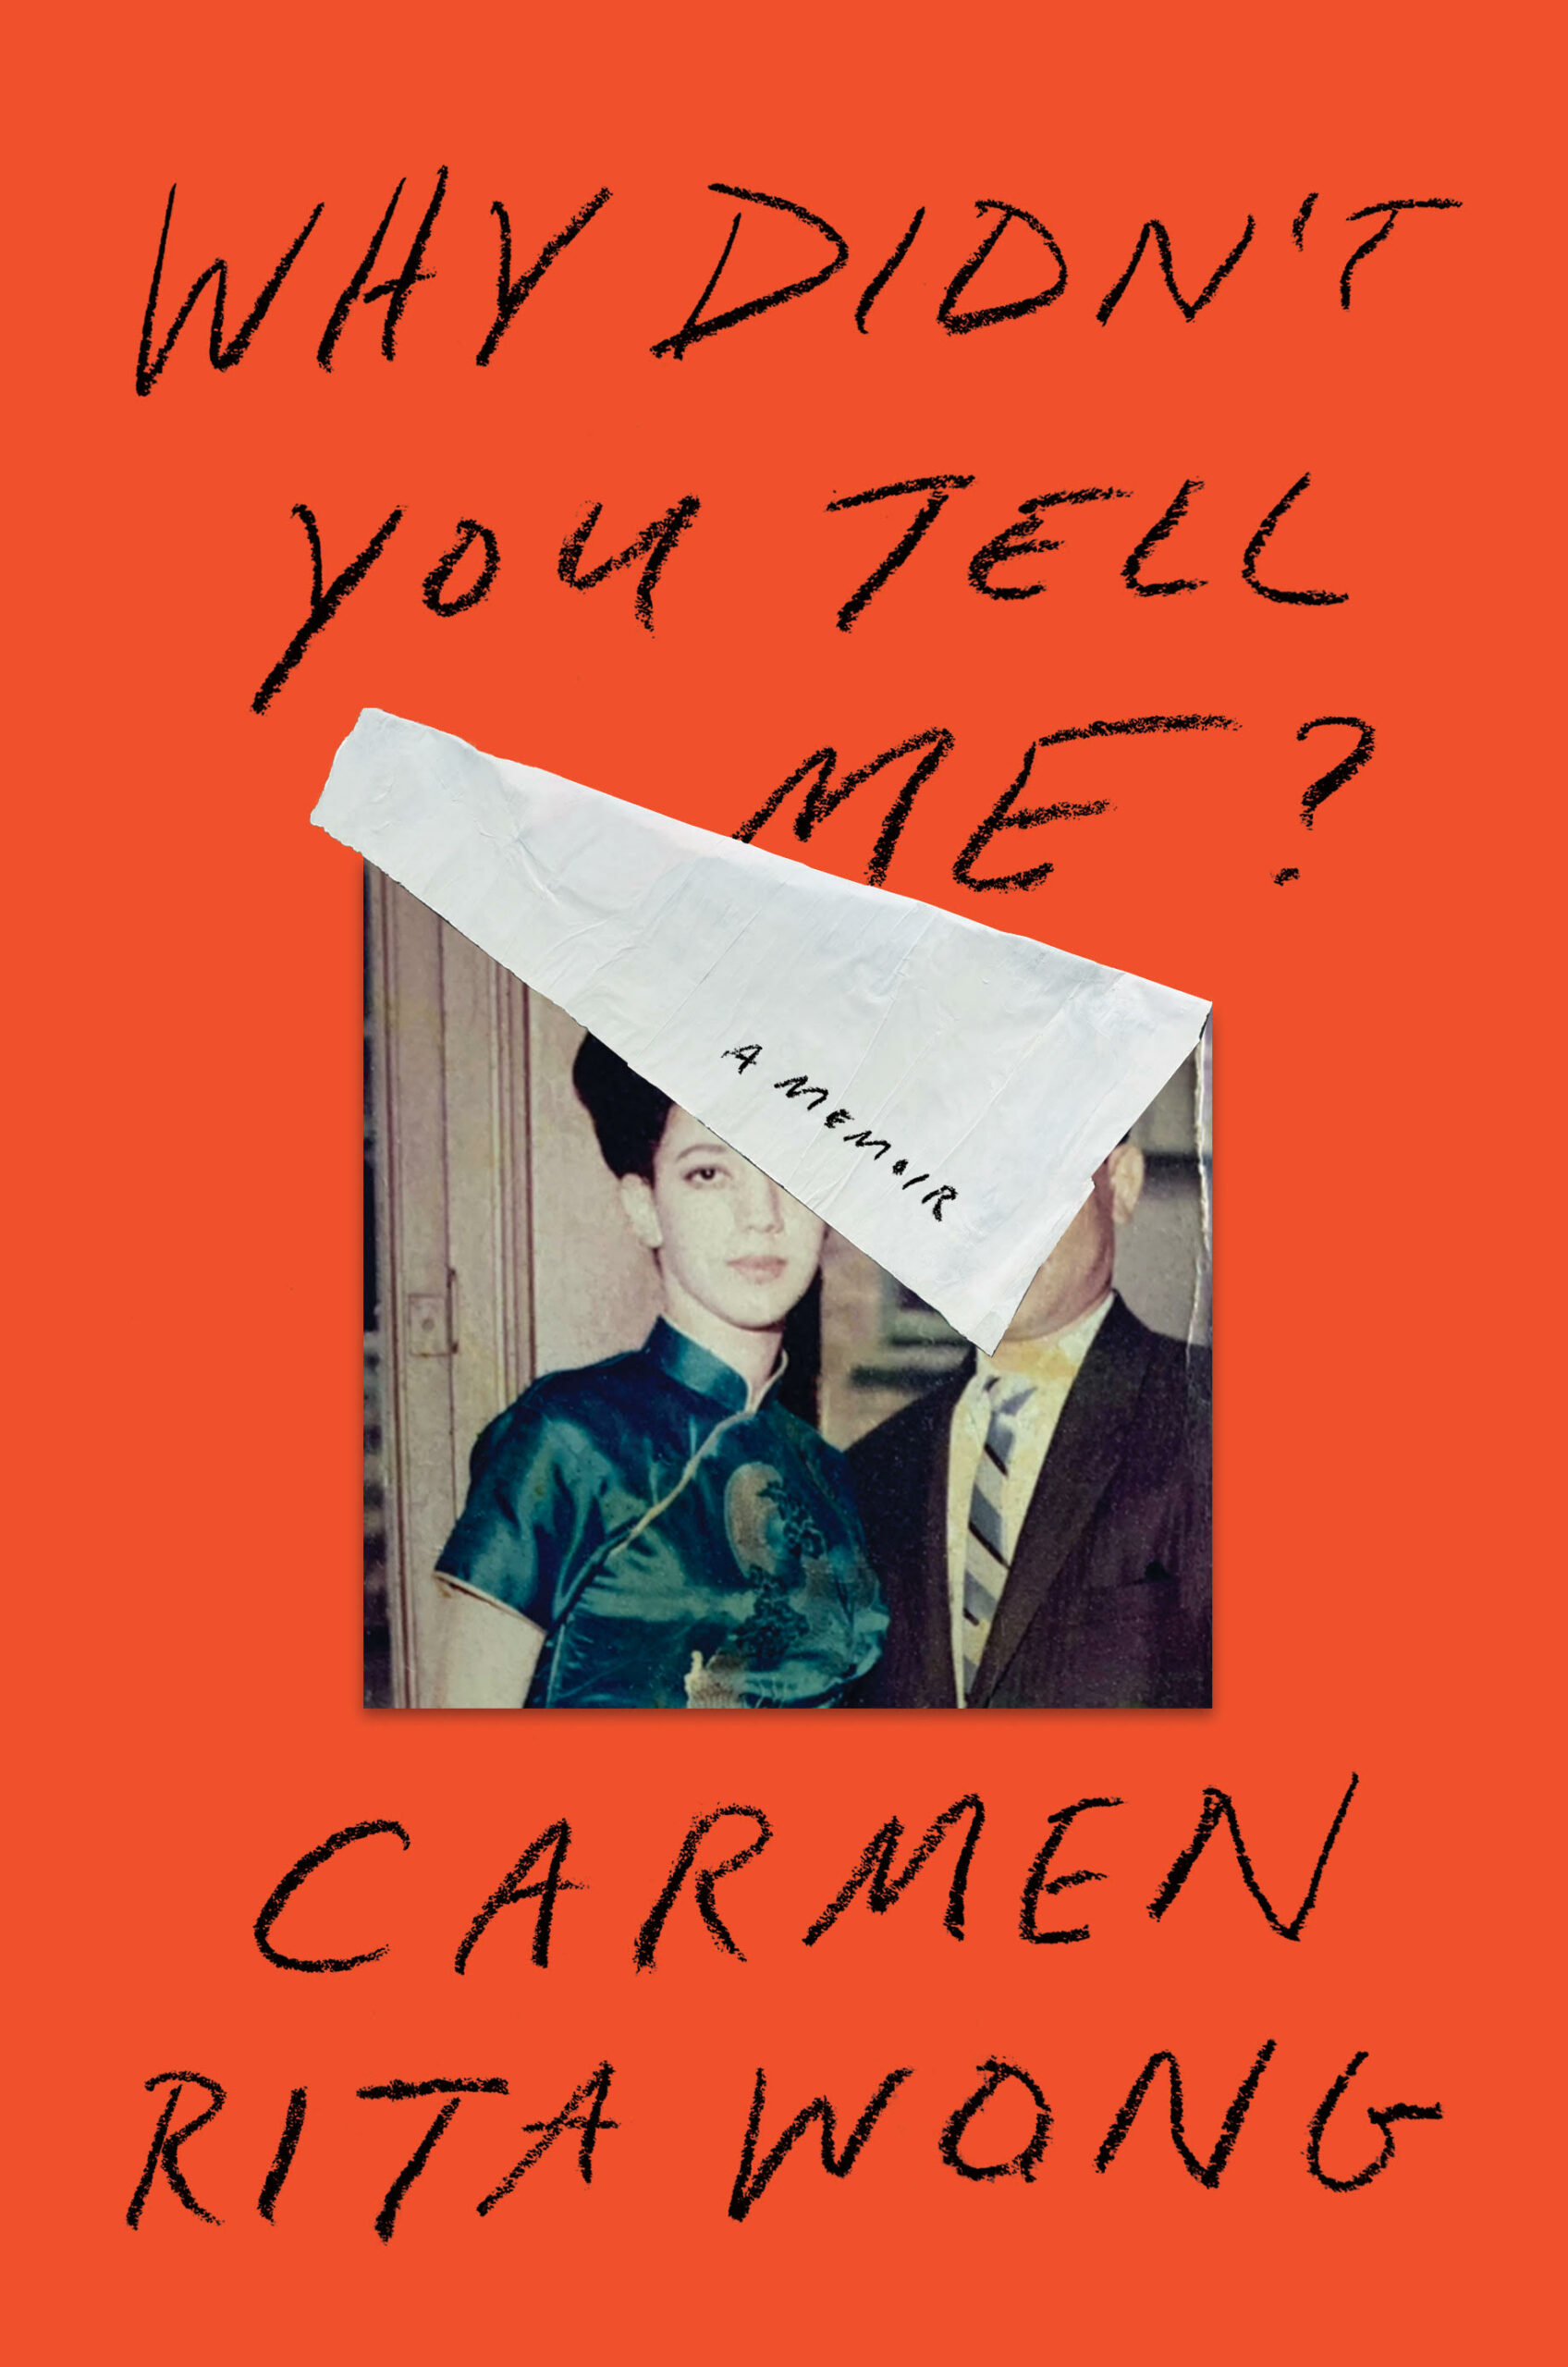 Book Launch: Why Didn't You Tell Me? by Carmen Rita Wong, in conversation with Xochitl Gonzalez